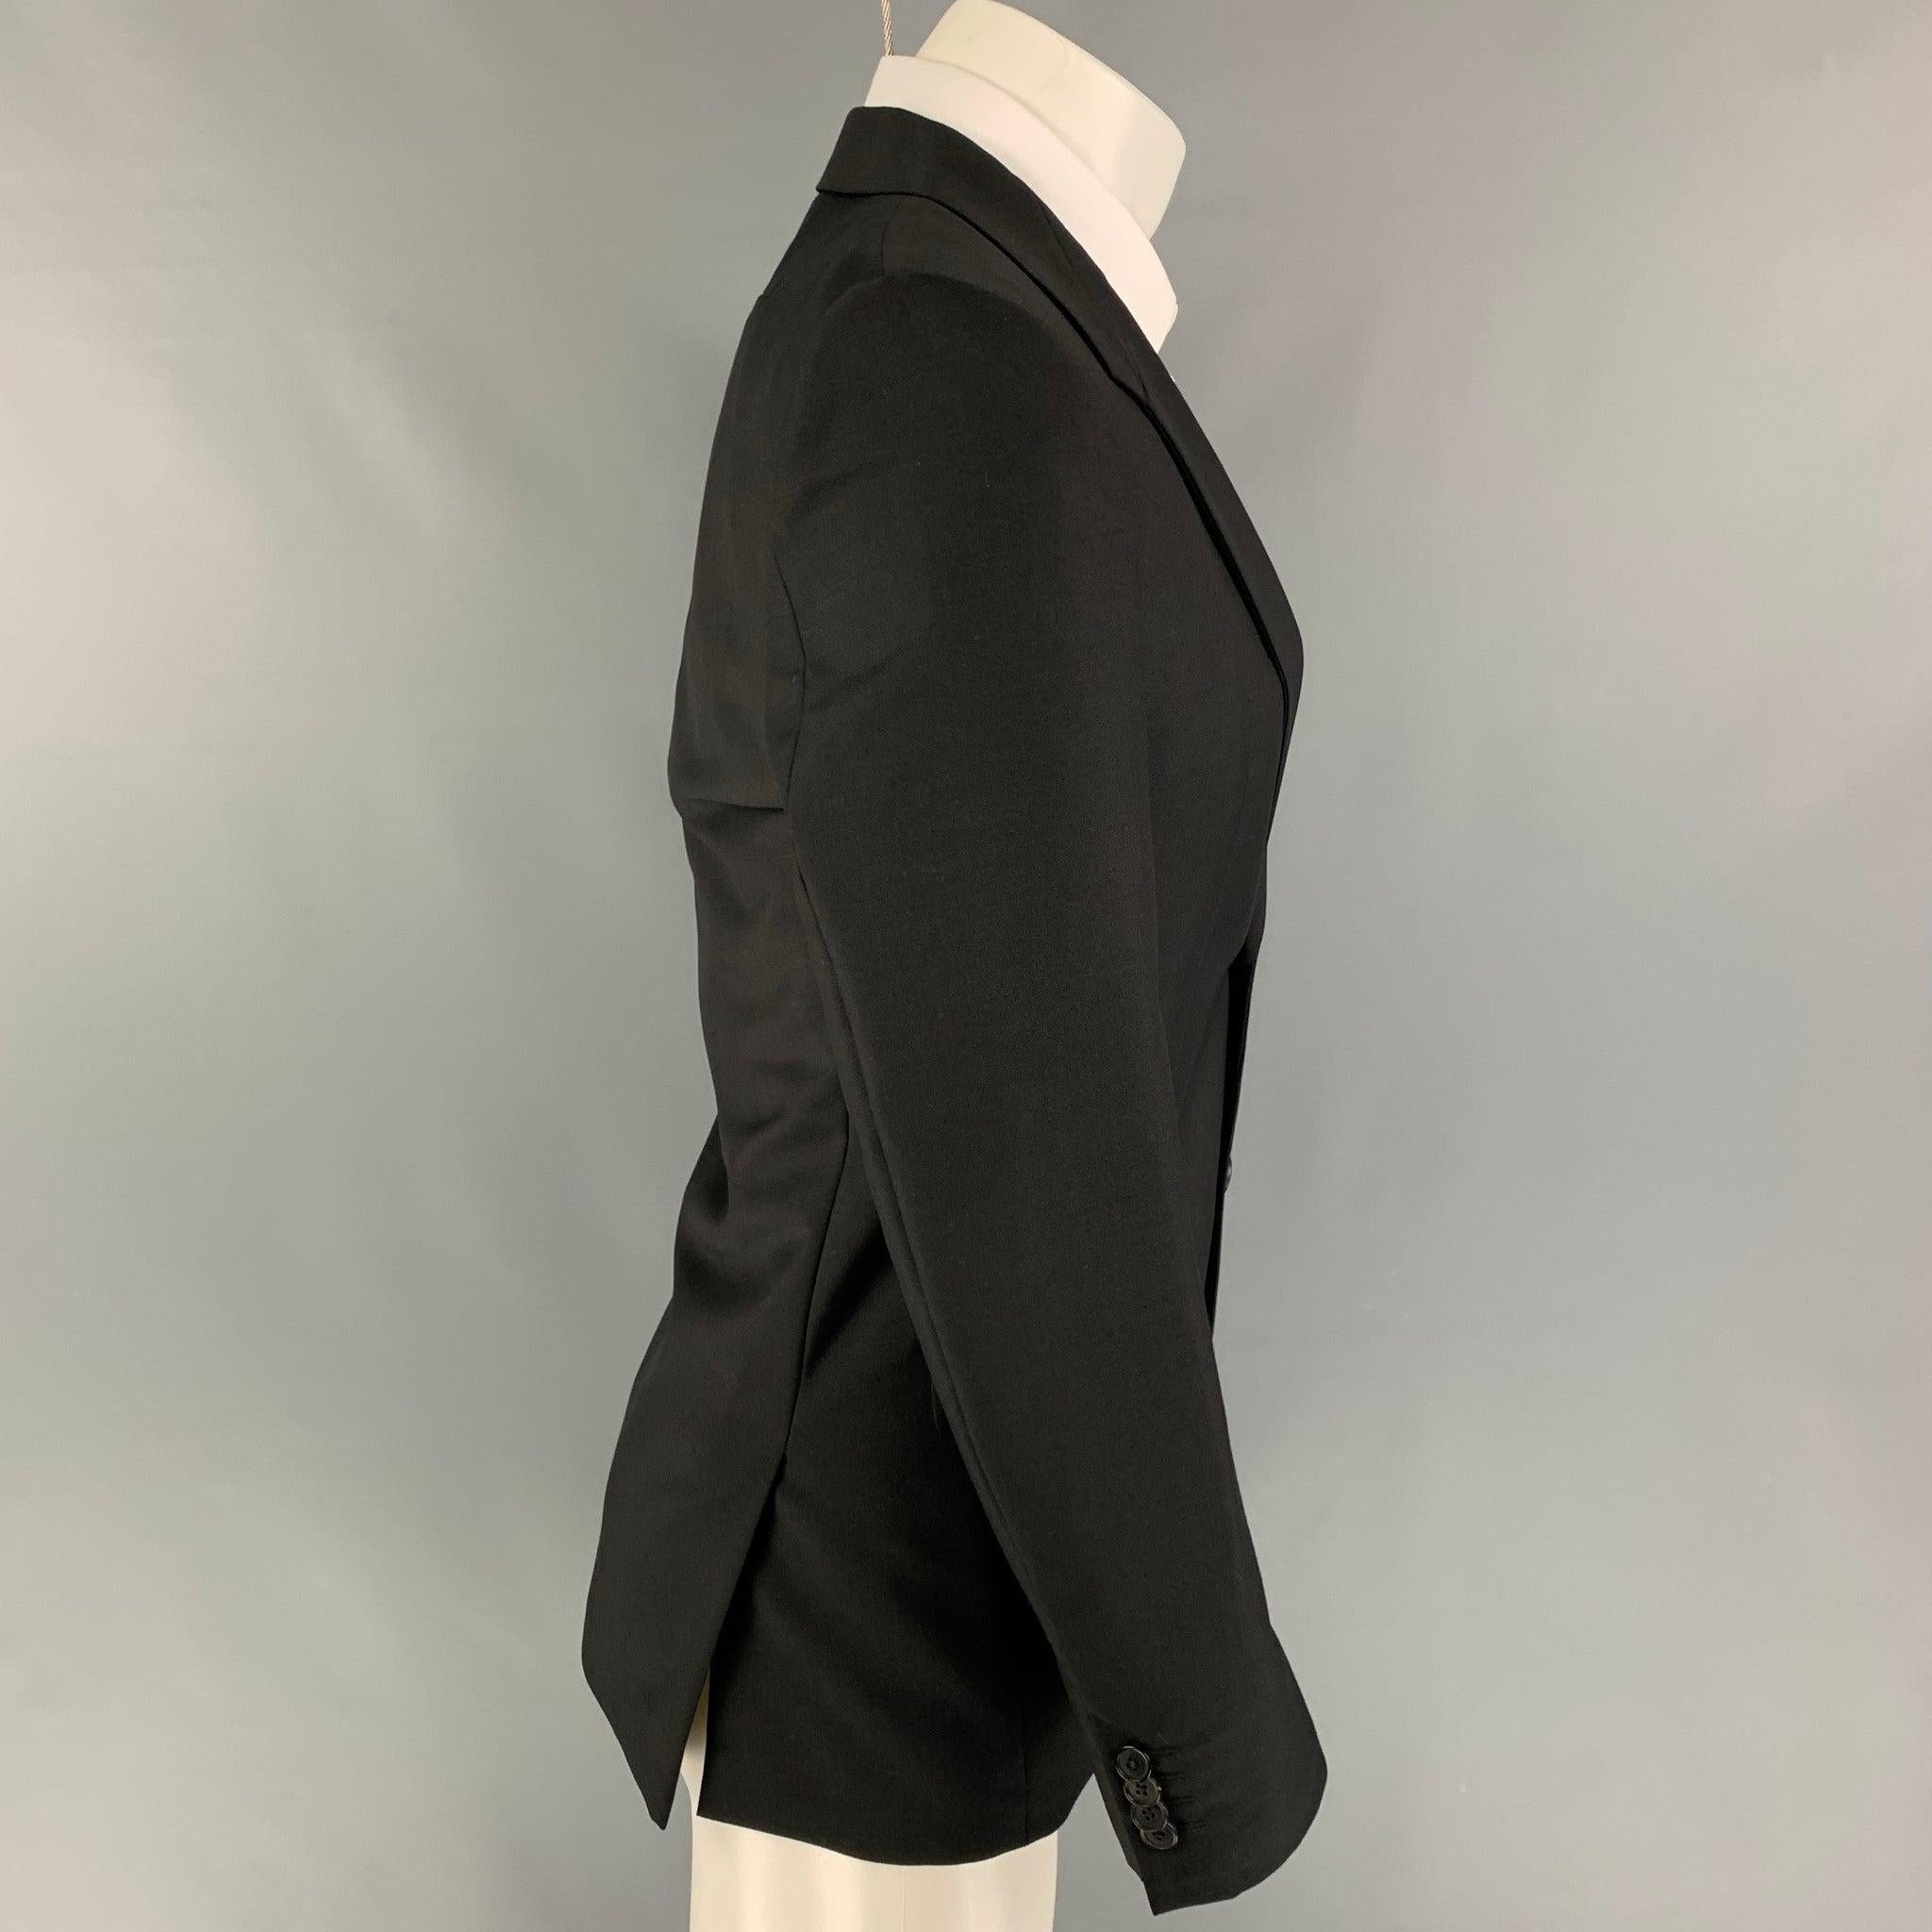 GIVENCHY sport coat comes in a black wool / mohair with a full liner featuring a structured lapel, flap pockets, double back vent, and a double button closure.
Excellent
Pre-Owned Condition. 

Marked:   46 

Measurements: 
 
Shoulder: 17 inches 